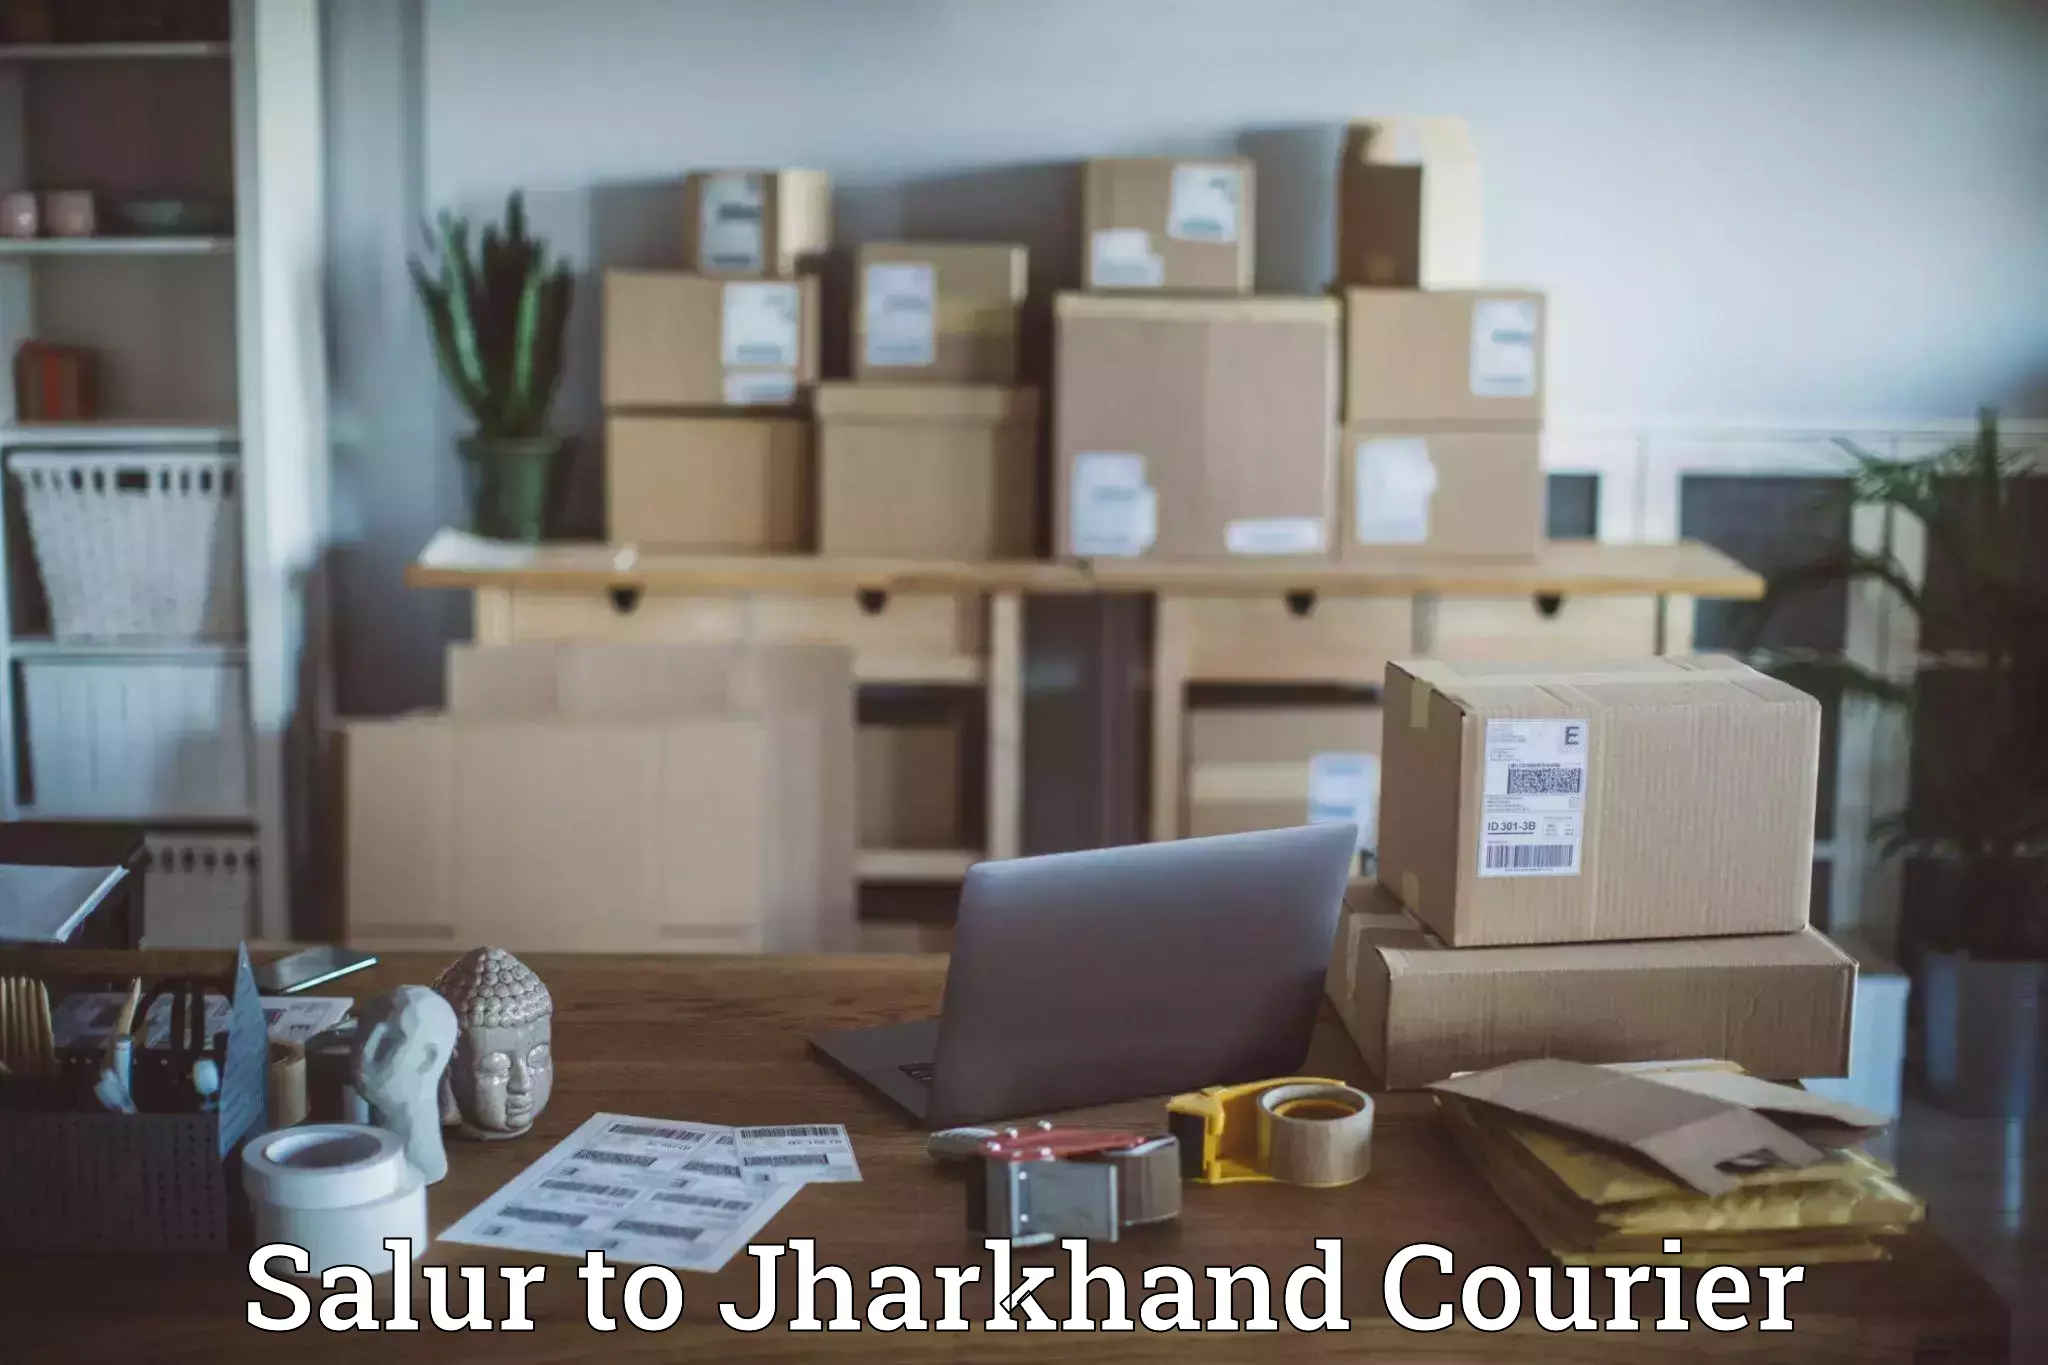 Affordable parcel service Salur to Jharkhand